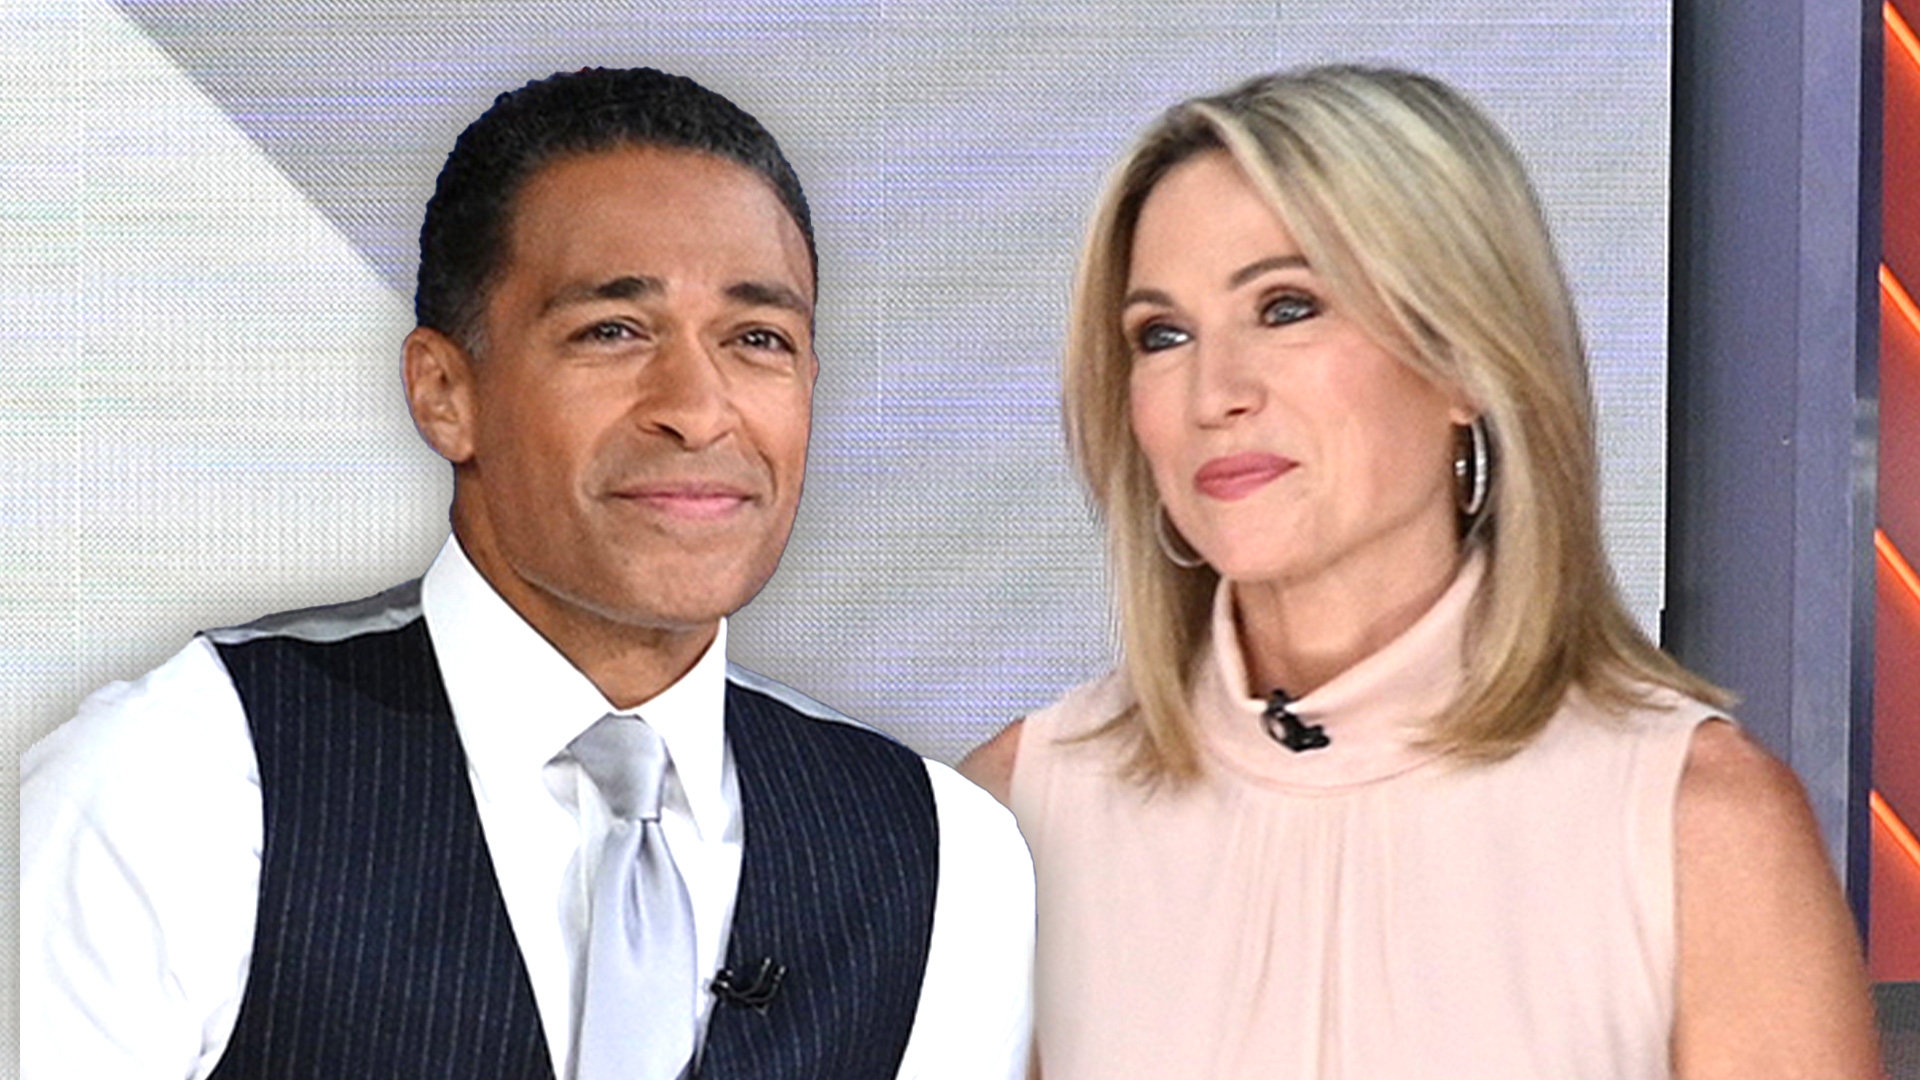 Good Morning America 3 hosts Amy Robach and T.J. Holmes go off the air  after revelations of their romantic relationship